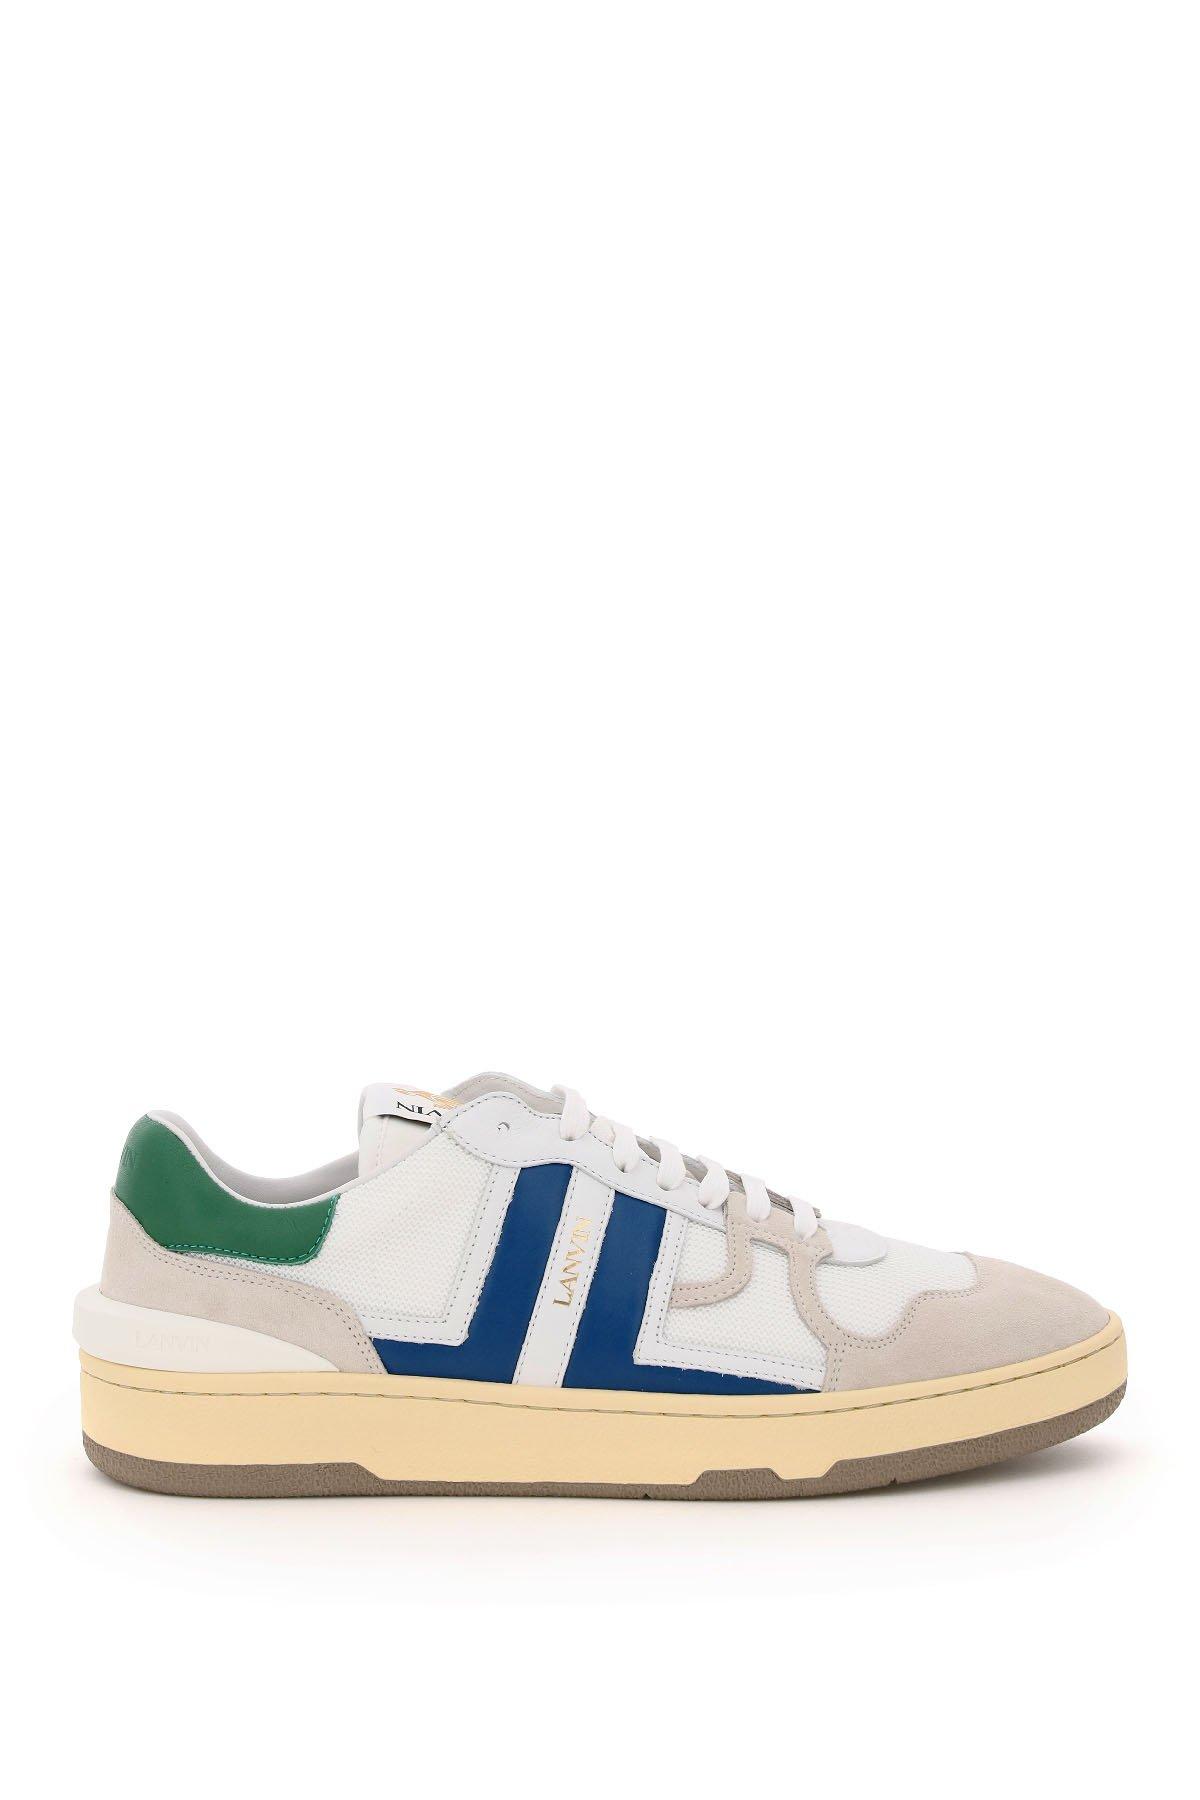 Lanvin Synthetic Clay Low-top Sneakers in Blue for Men - Lyst